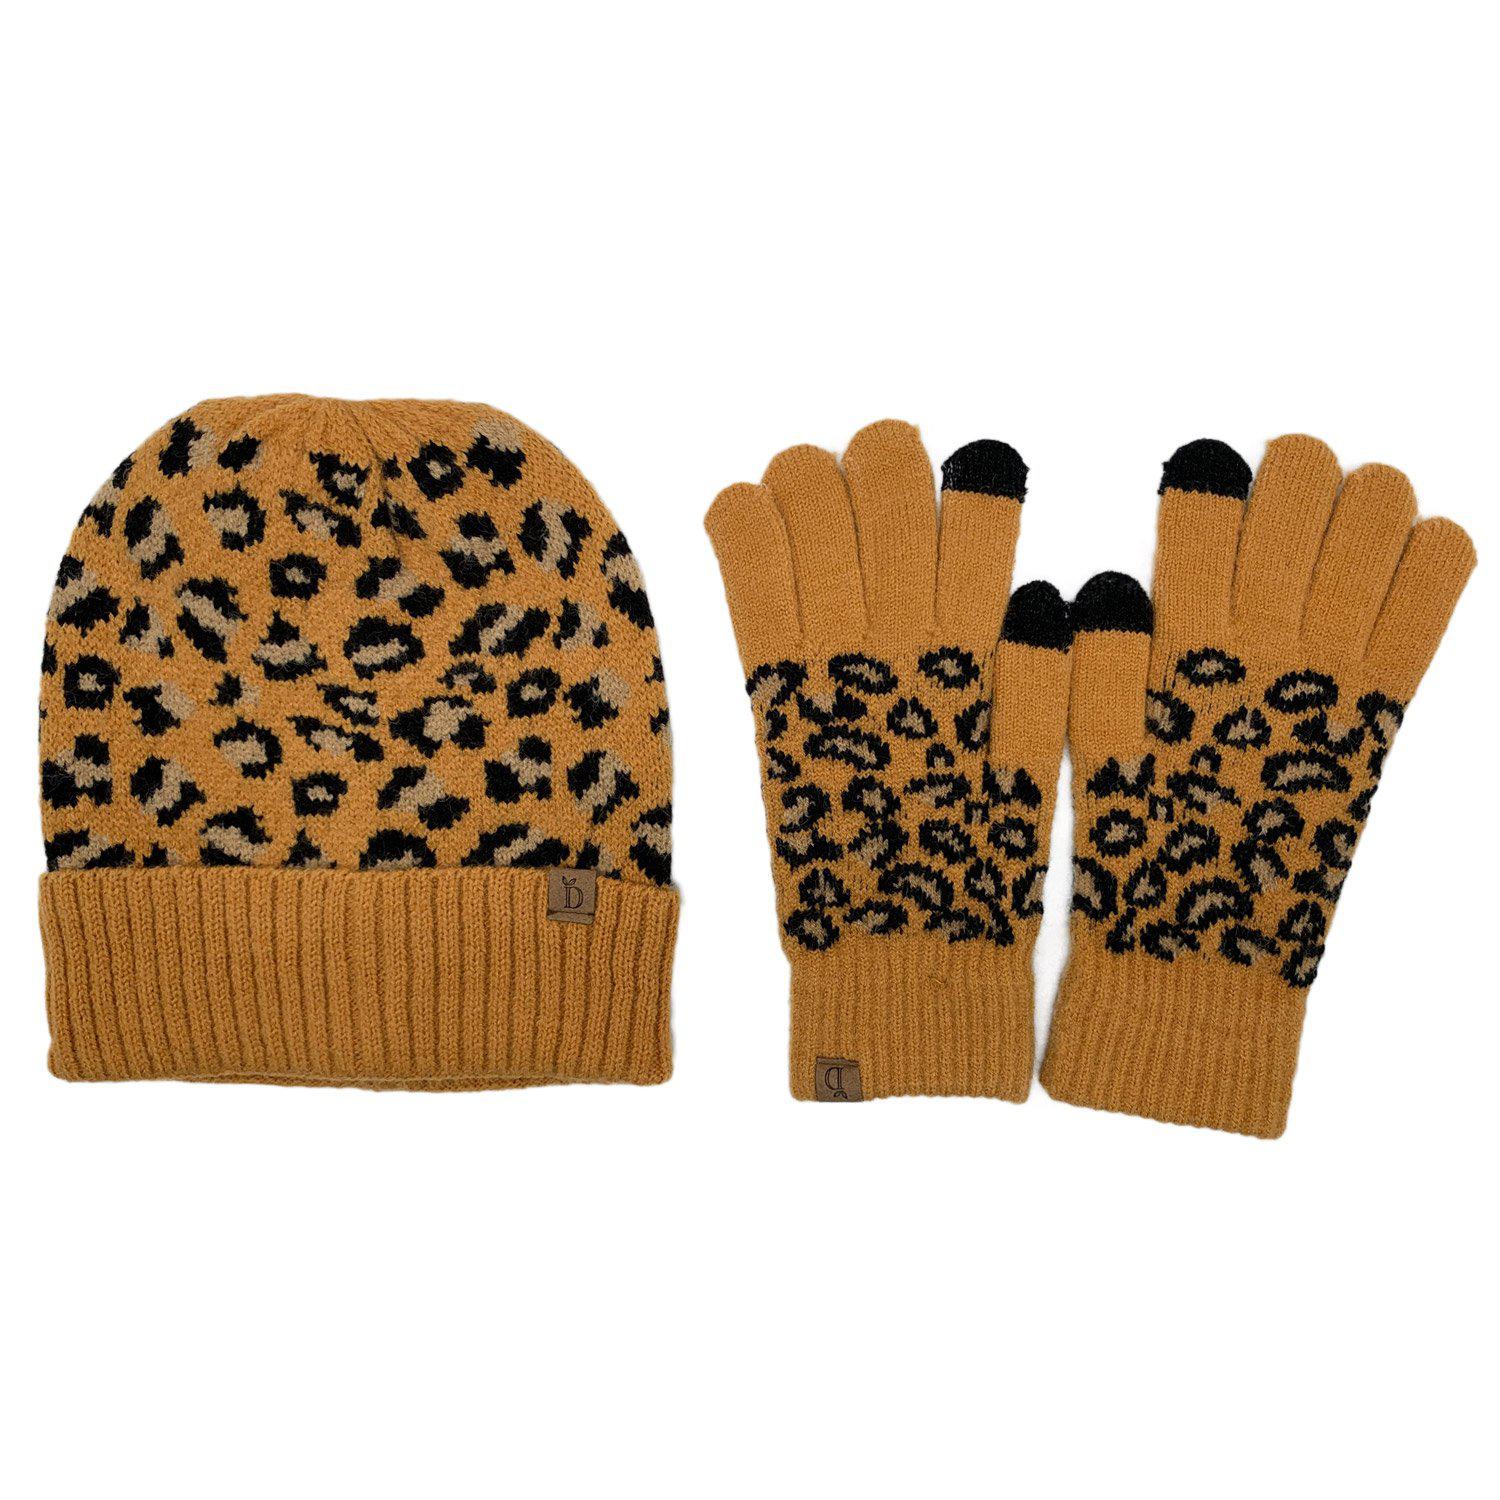 Empire Cove Winter Set Knit Ribbed Leopard Cuff Beanie and Touch Screen Gloves Gift Set-Hat/gloves-Empire Cove-Brown-Casaba Shop